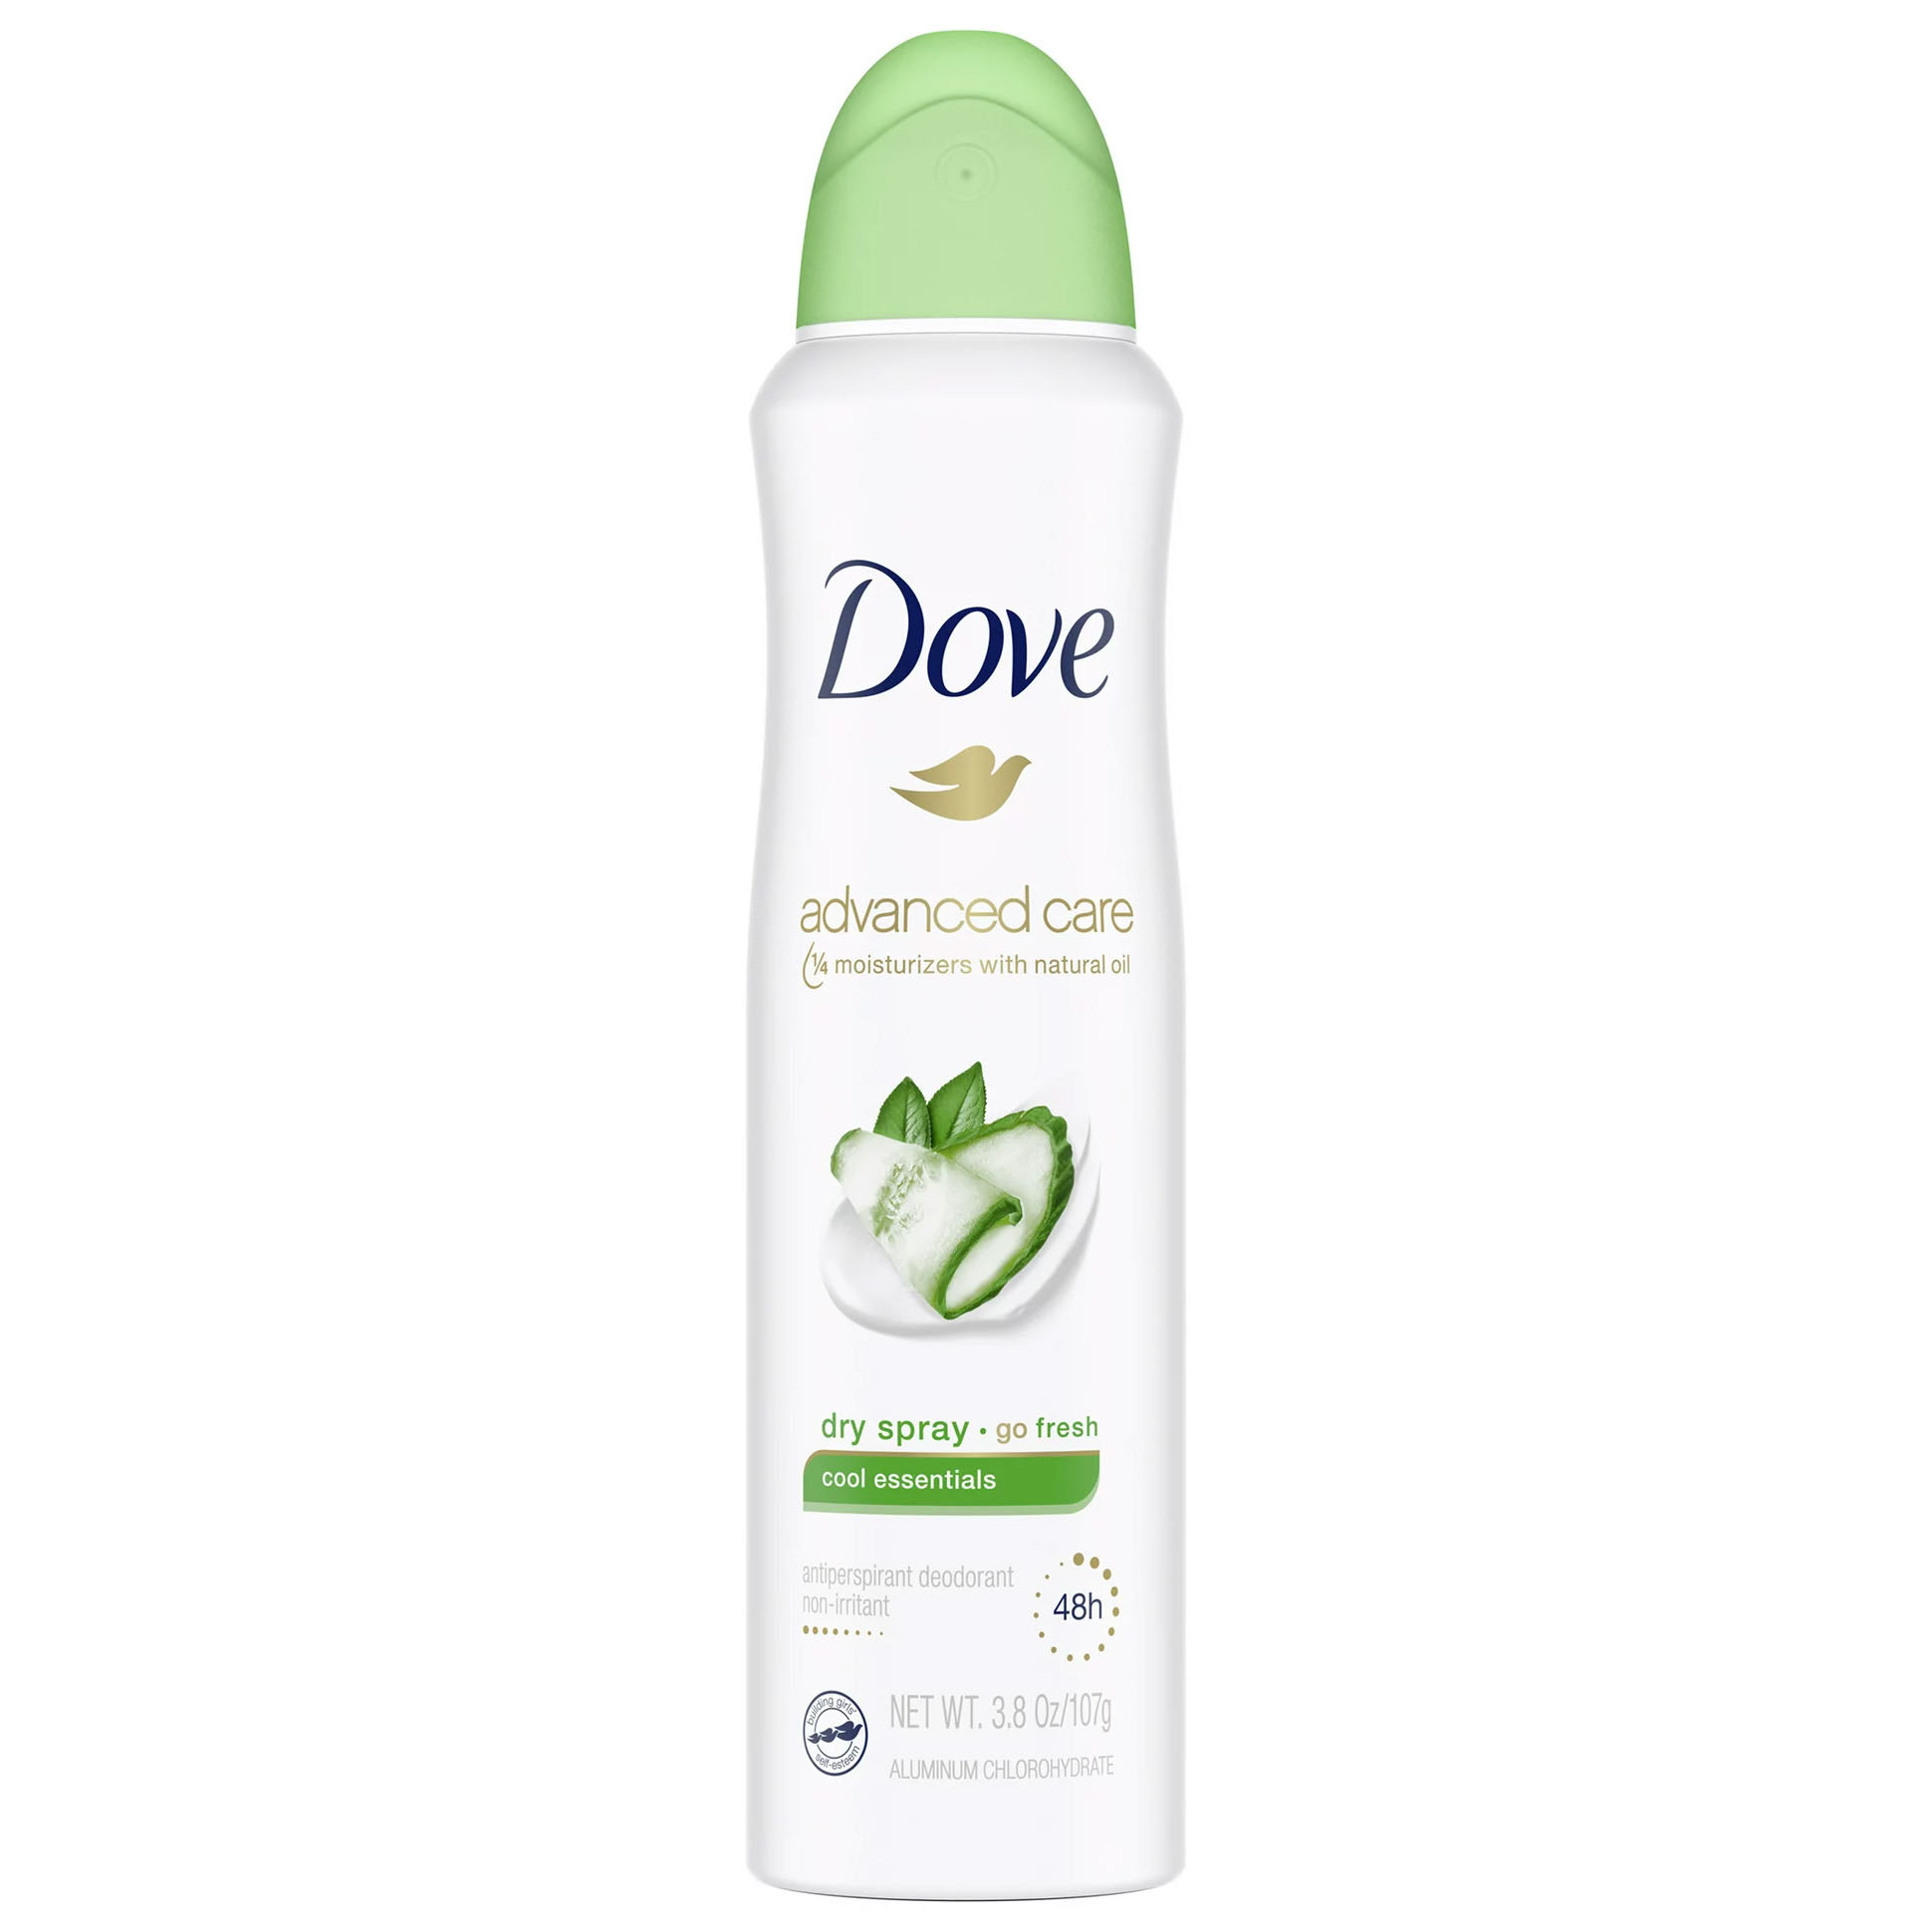 can of dove spray deodorant with green accents